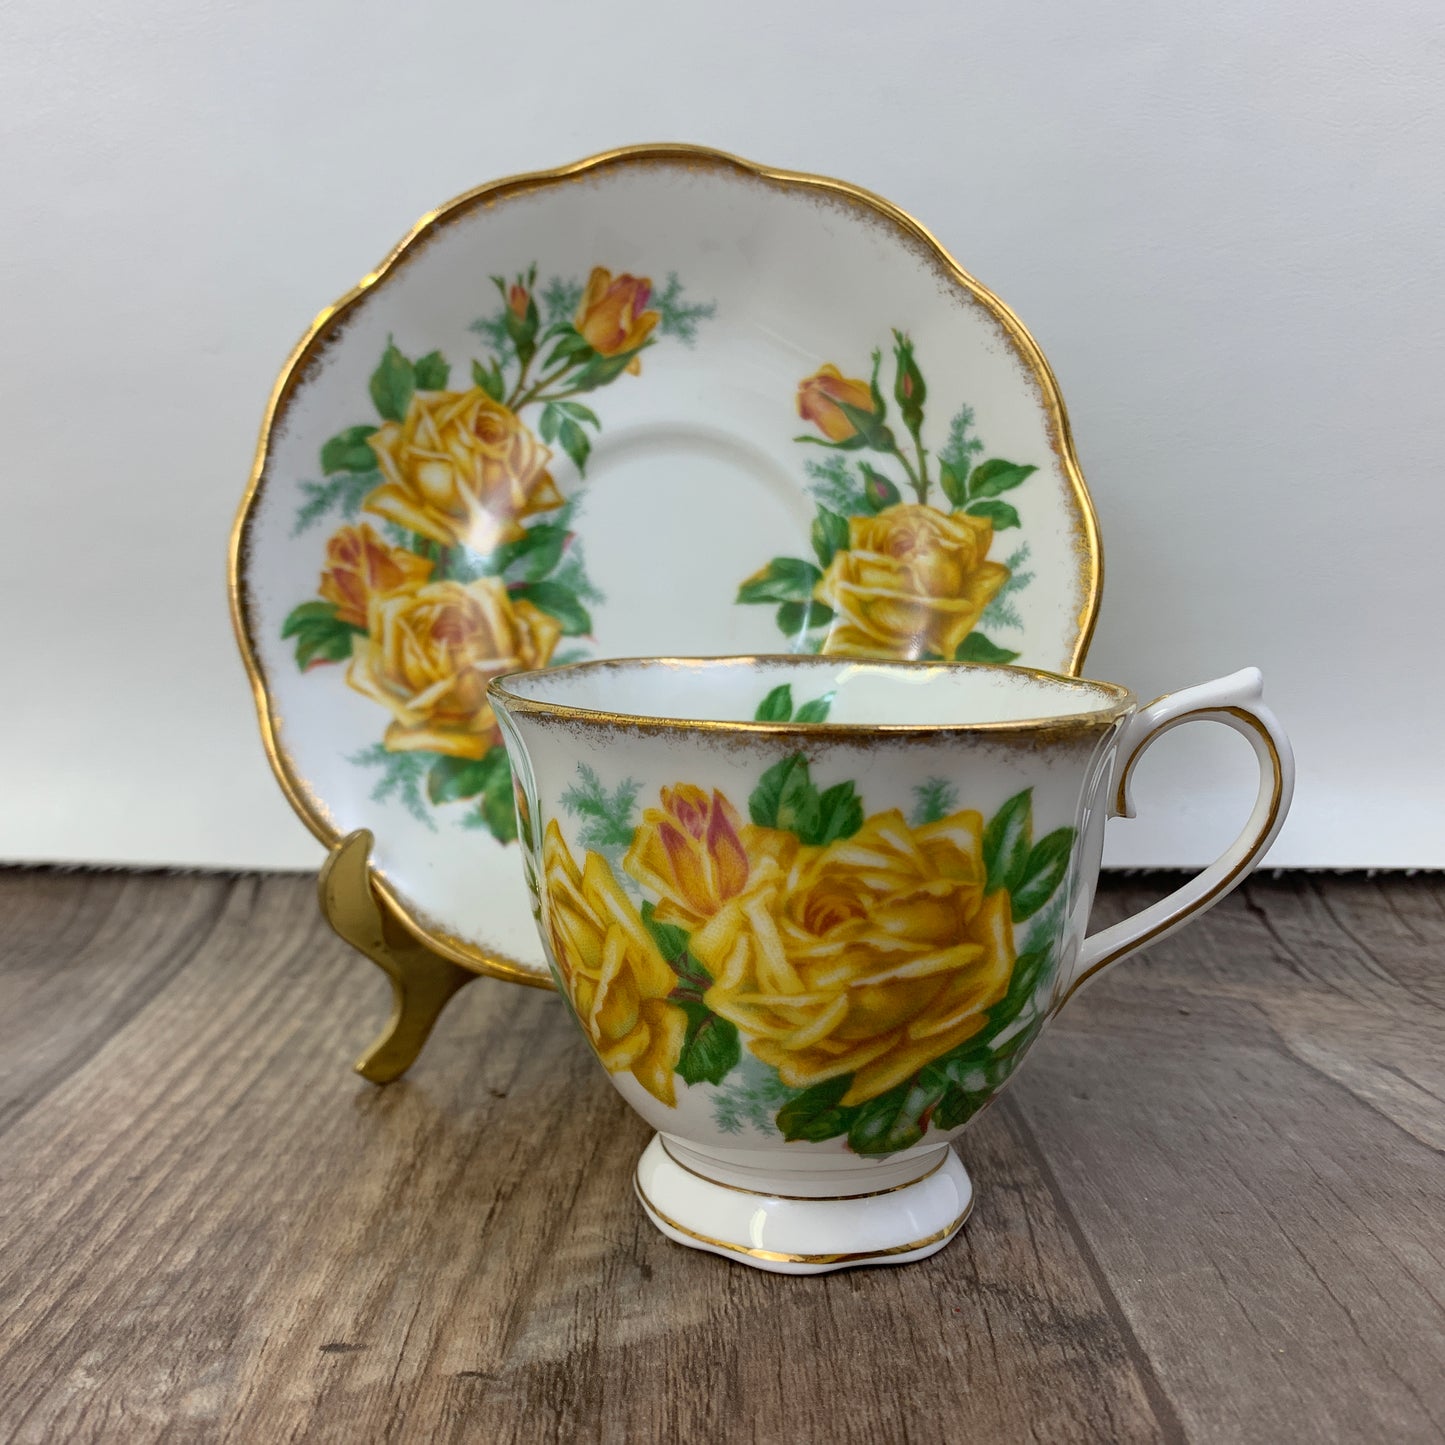 Royal Albert Tea Rose Vintage Teacup with Yellow Roses 1940s Tea Cup and Saucer Countess Shape